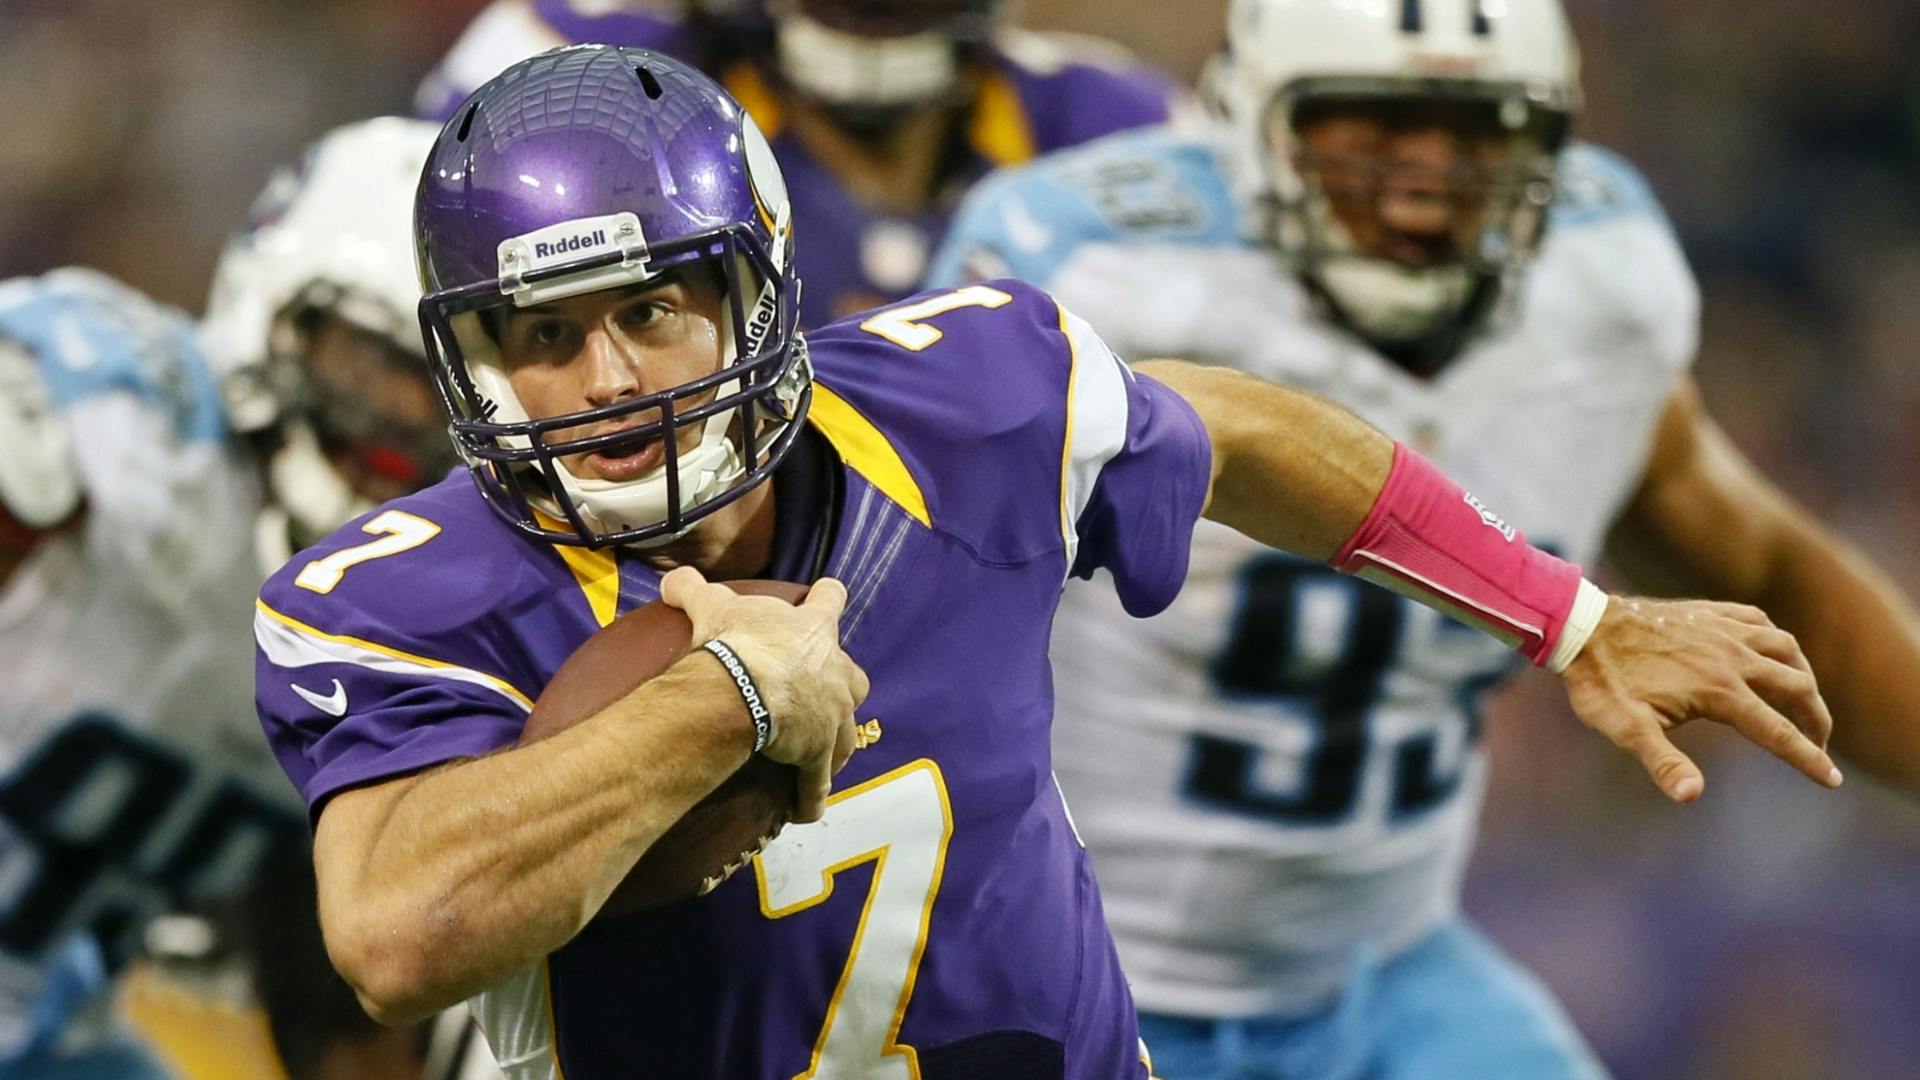 The Vikings defeated the Tennessee Titans 30-7 and moved to 4-1 on the season.